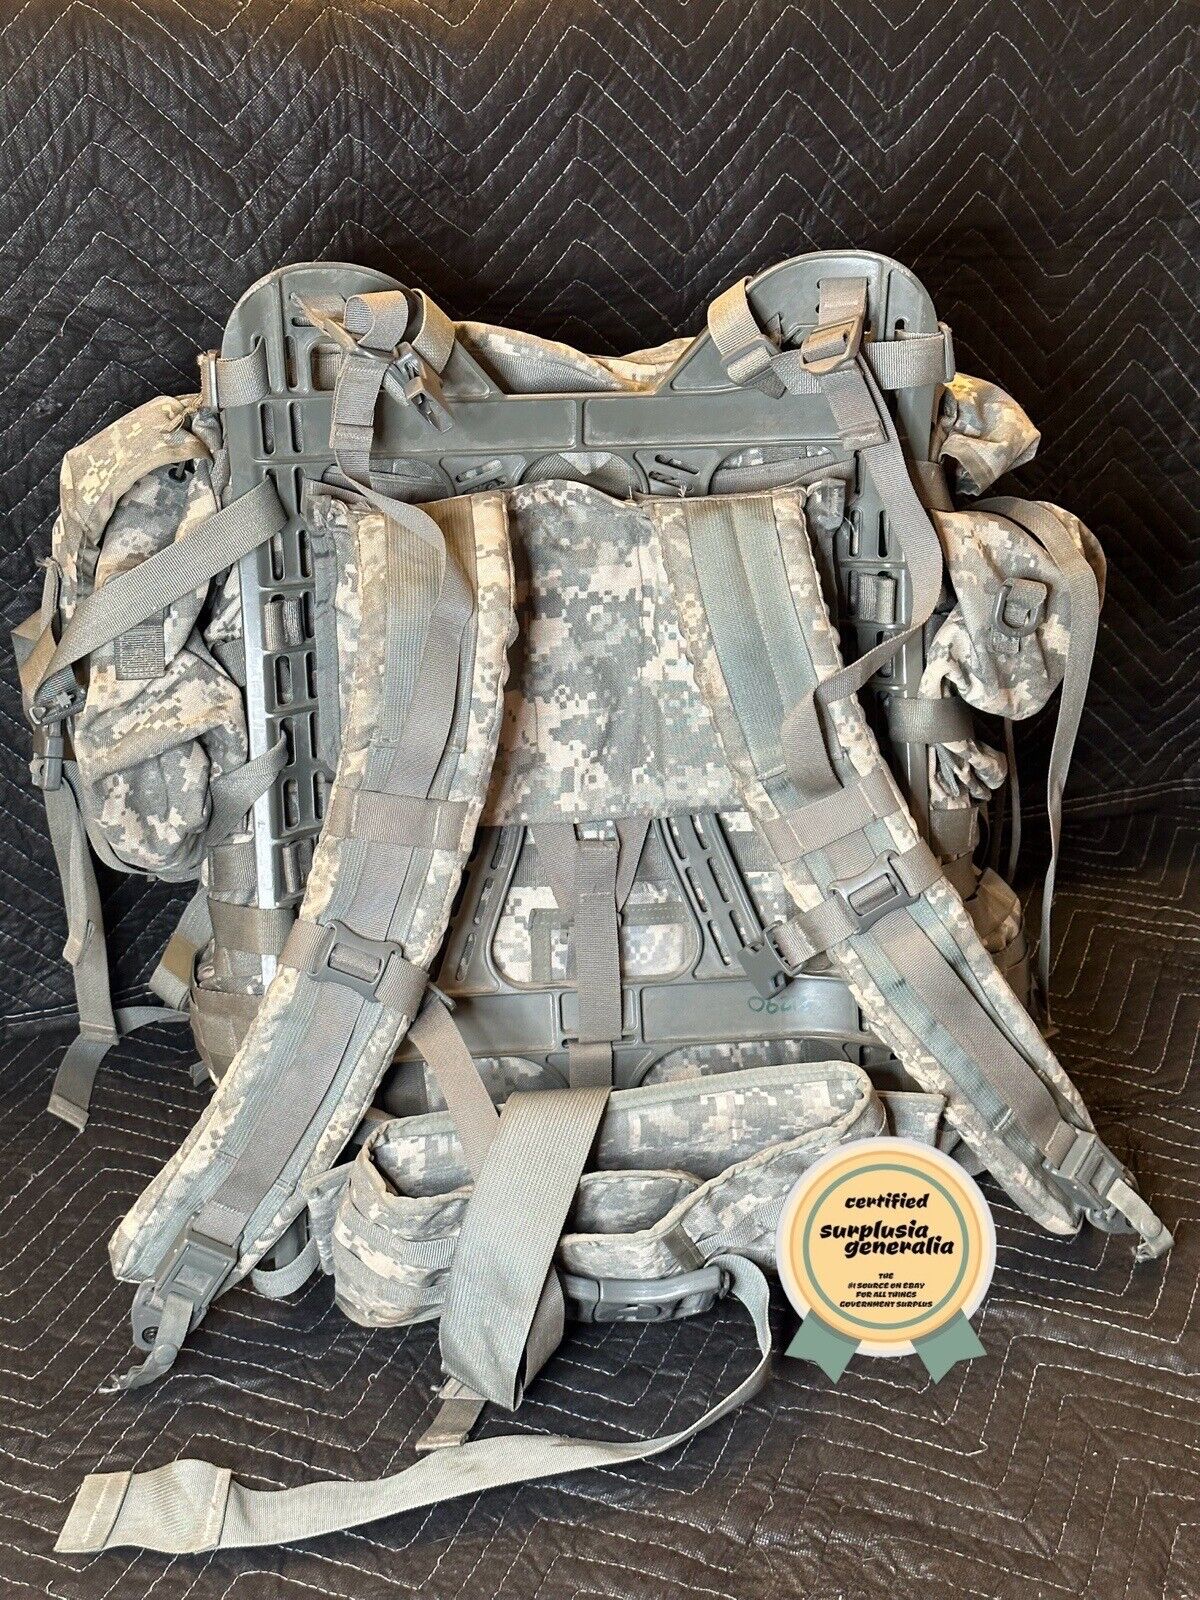 MOLLE II Large Rucksack Complete Gen1 Field Pack Set w/ Straps, Frame, Pouches